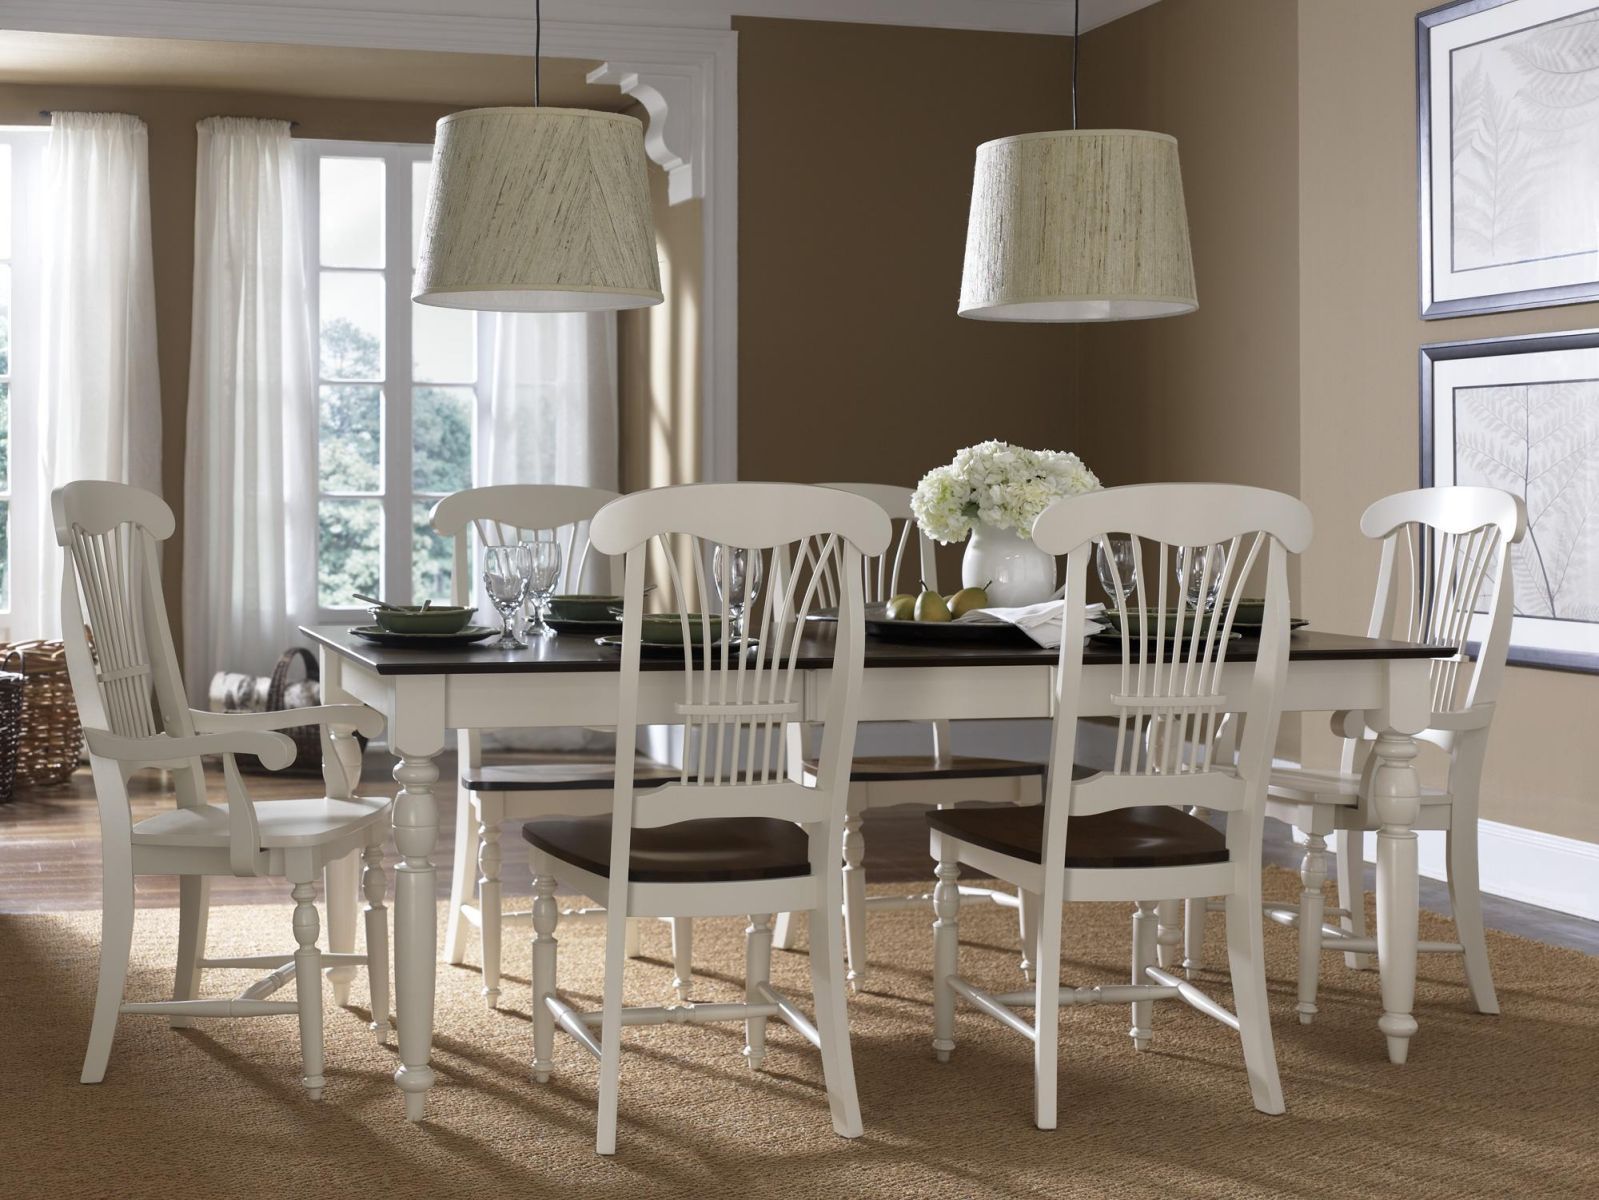 Canadel Dining Room SetCall (631) 742-1351 for Best Price Guarantee Long Island FurnitureDinette Sets New York , Dinette Sets Long Island , Dining Room Sets New York , Dining Room Sets Long Island, Dining Room Chairs Long Island